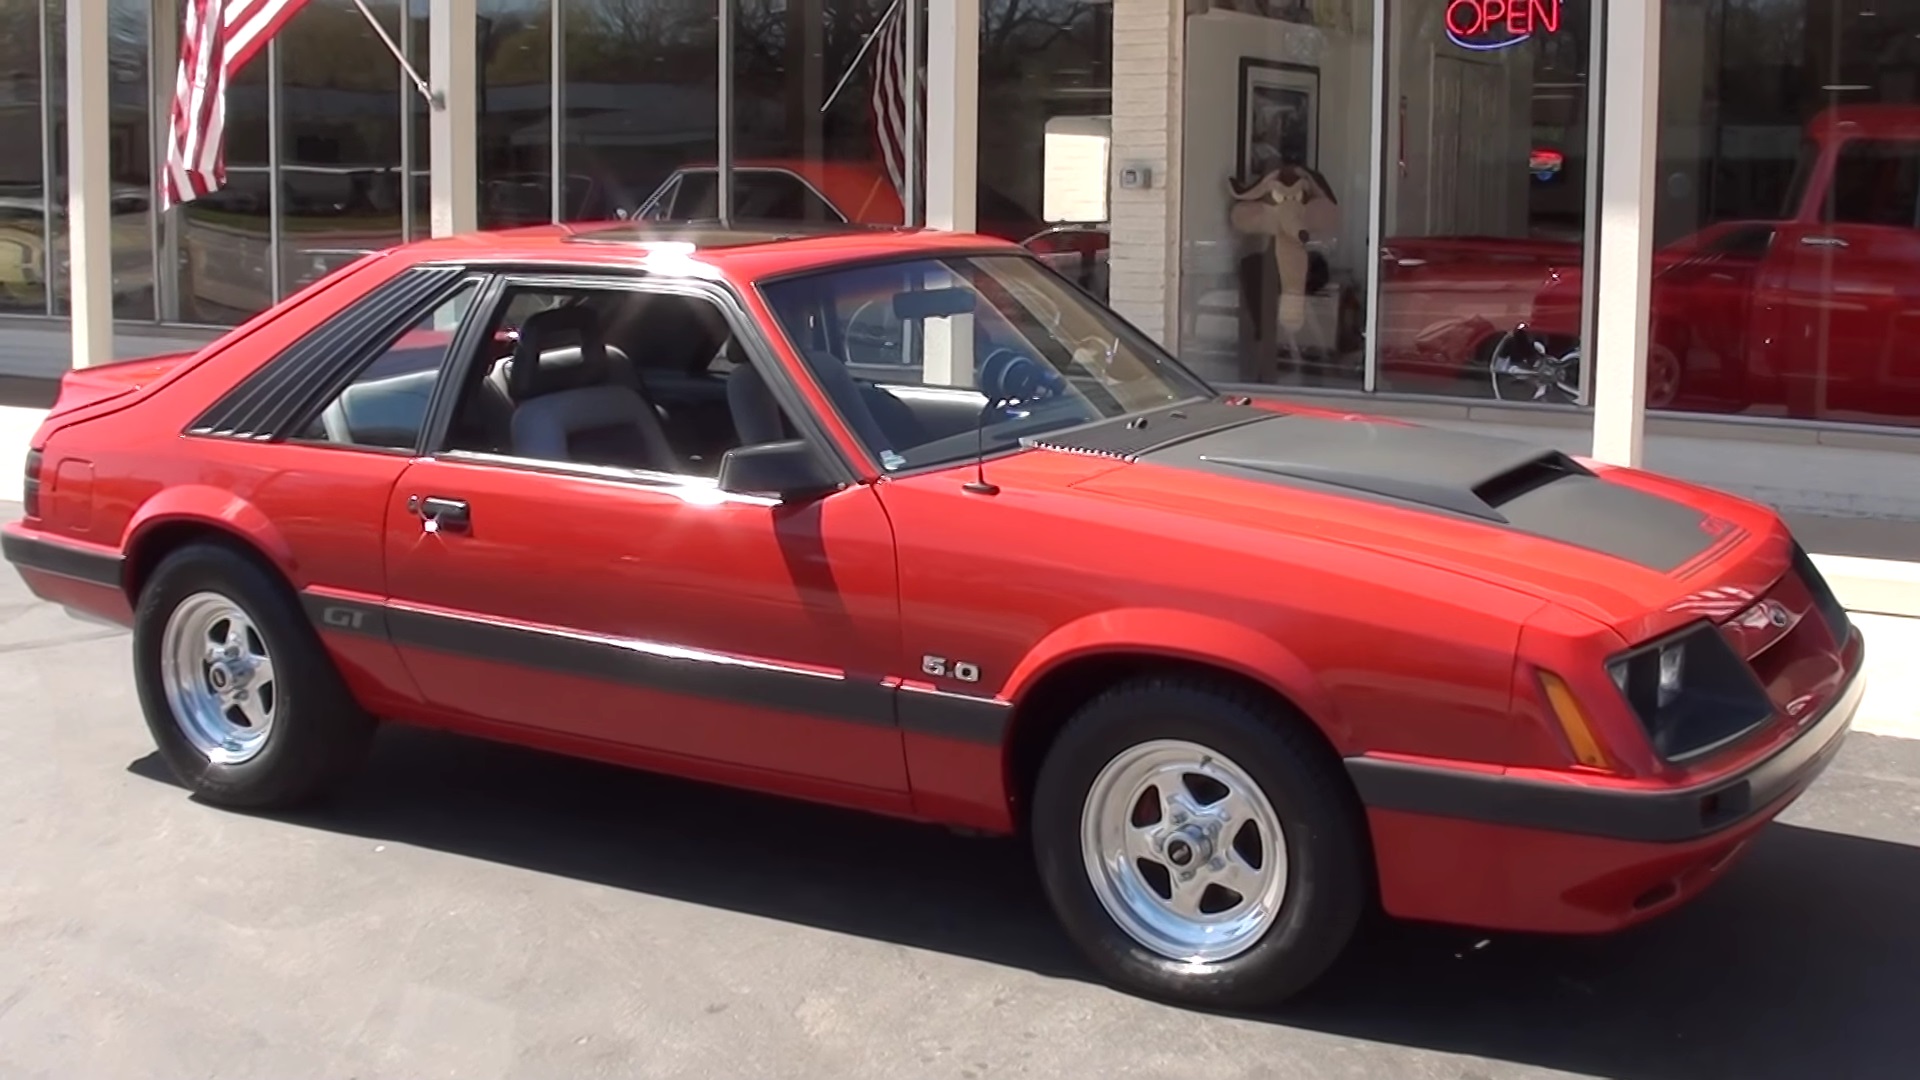 Video: 1985 Ford Mustang GT 5.0 Overview